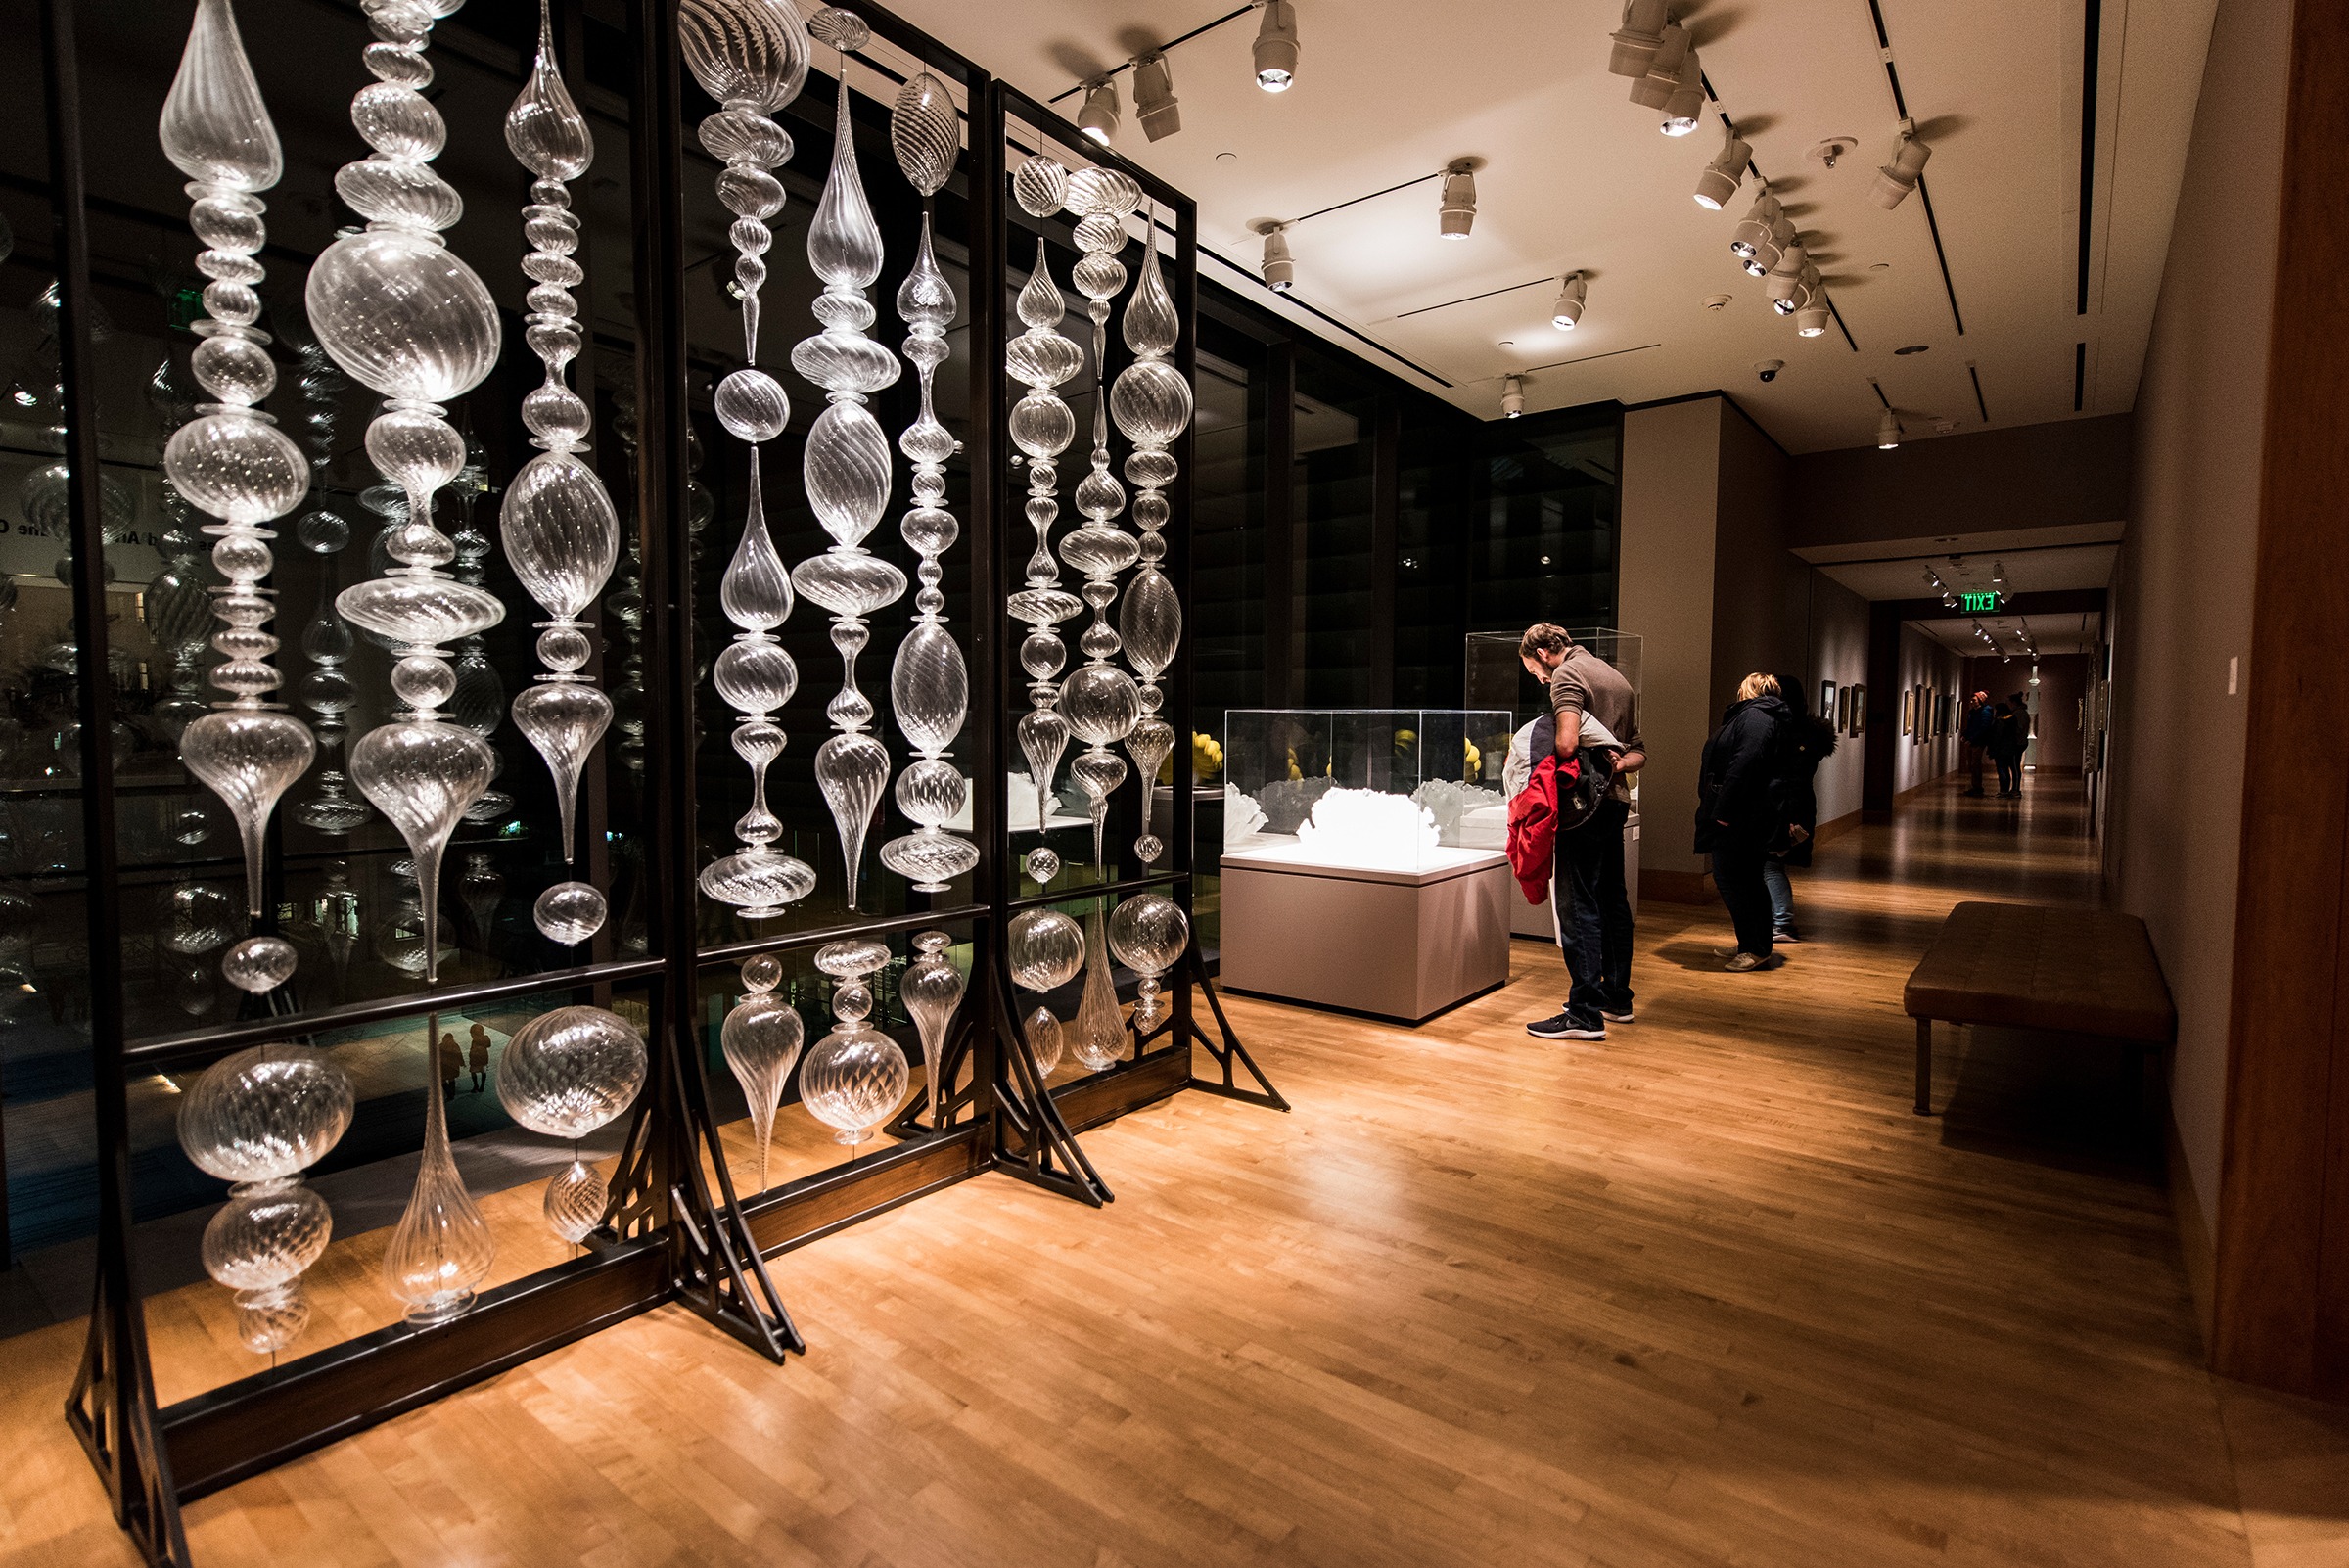 Guests enjoy the art during Night at the Museum at the Chazen Museum of Art at the University of Wisconsin-Madison.